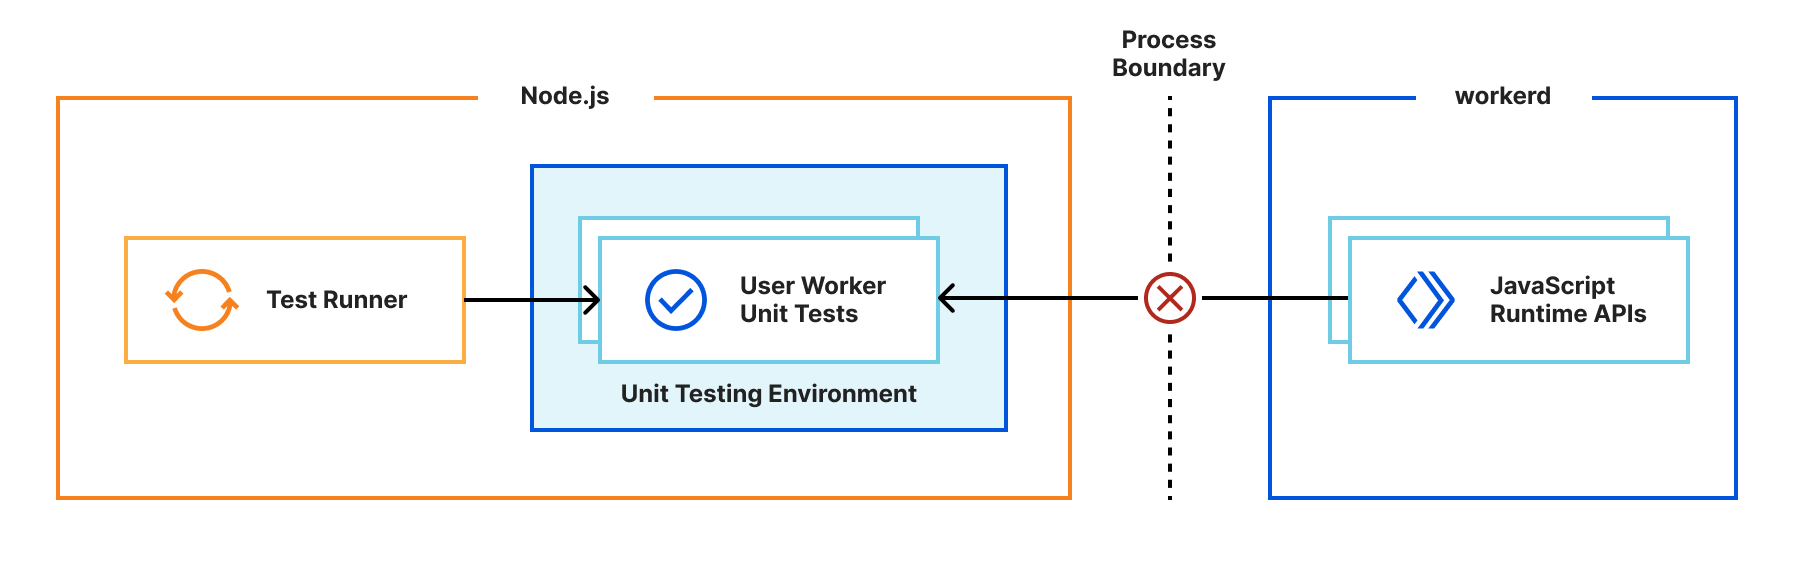 problem with Miniflare v3, the runtime APIs are defined in a separate process to the test environments, and JavaScript objects cannot cross process boundaries